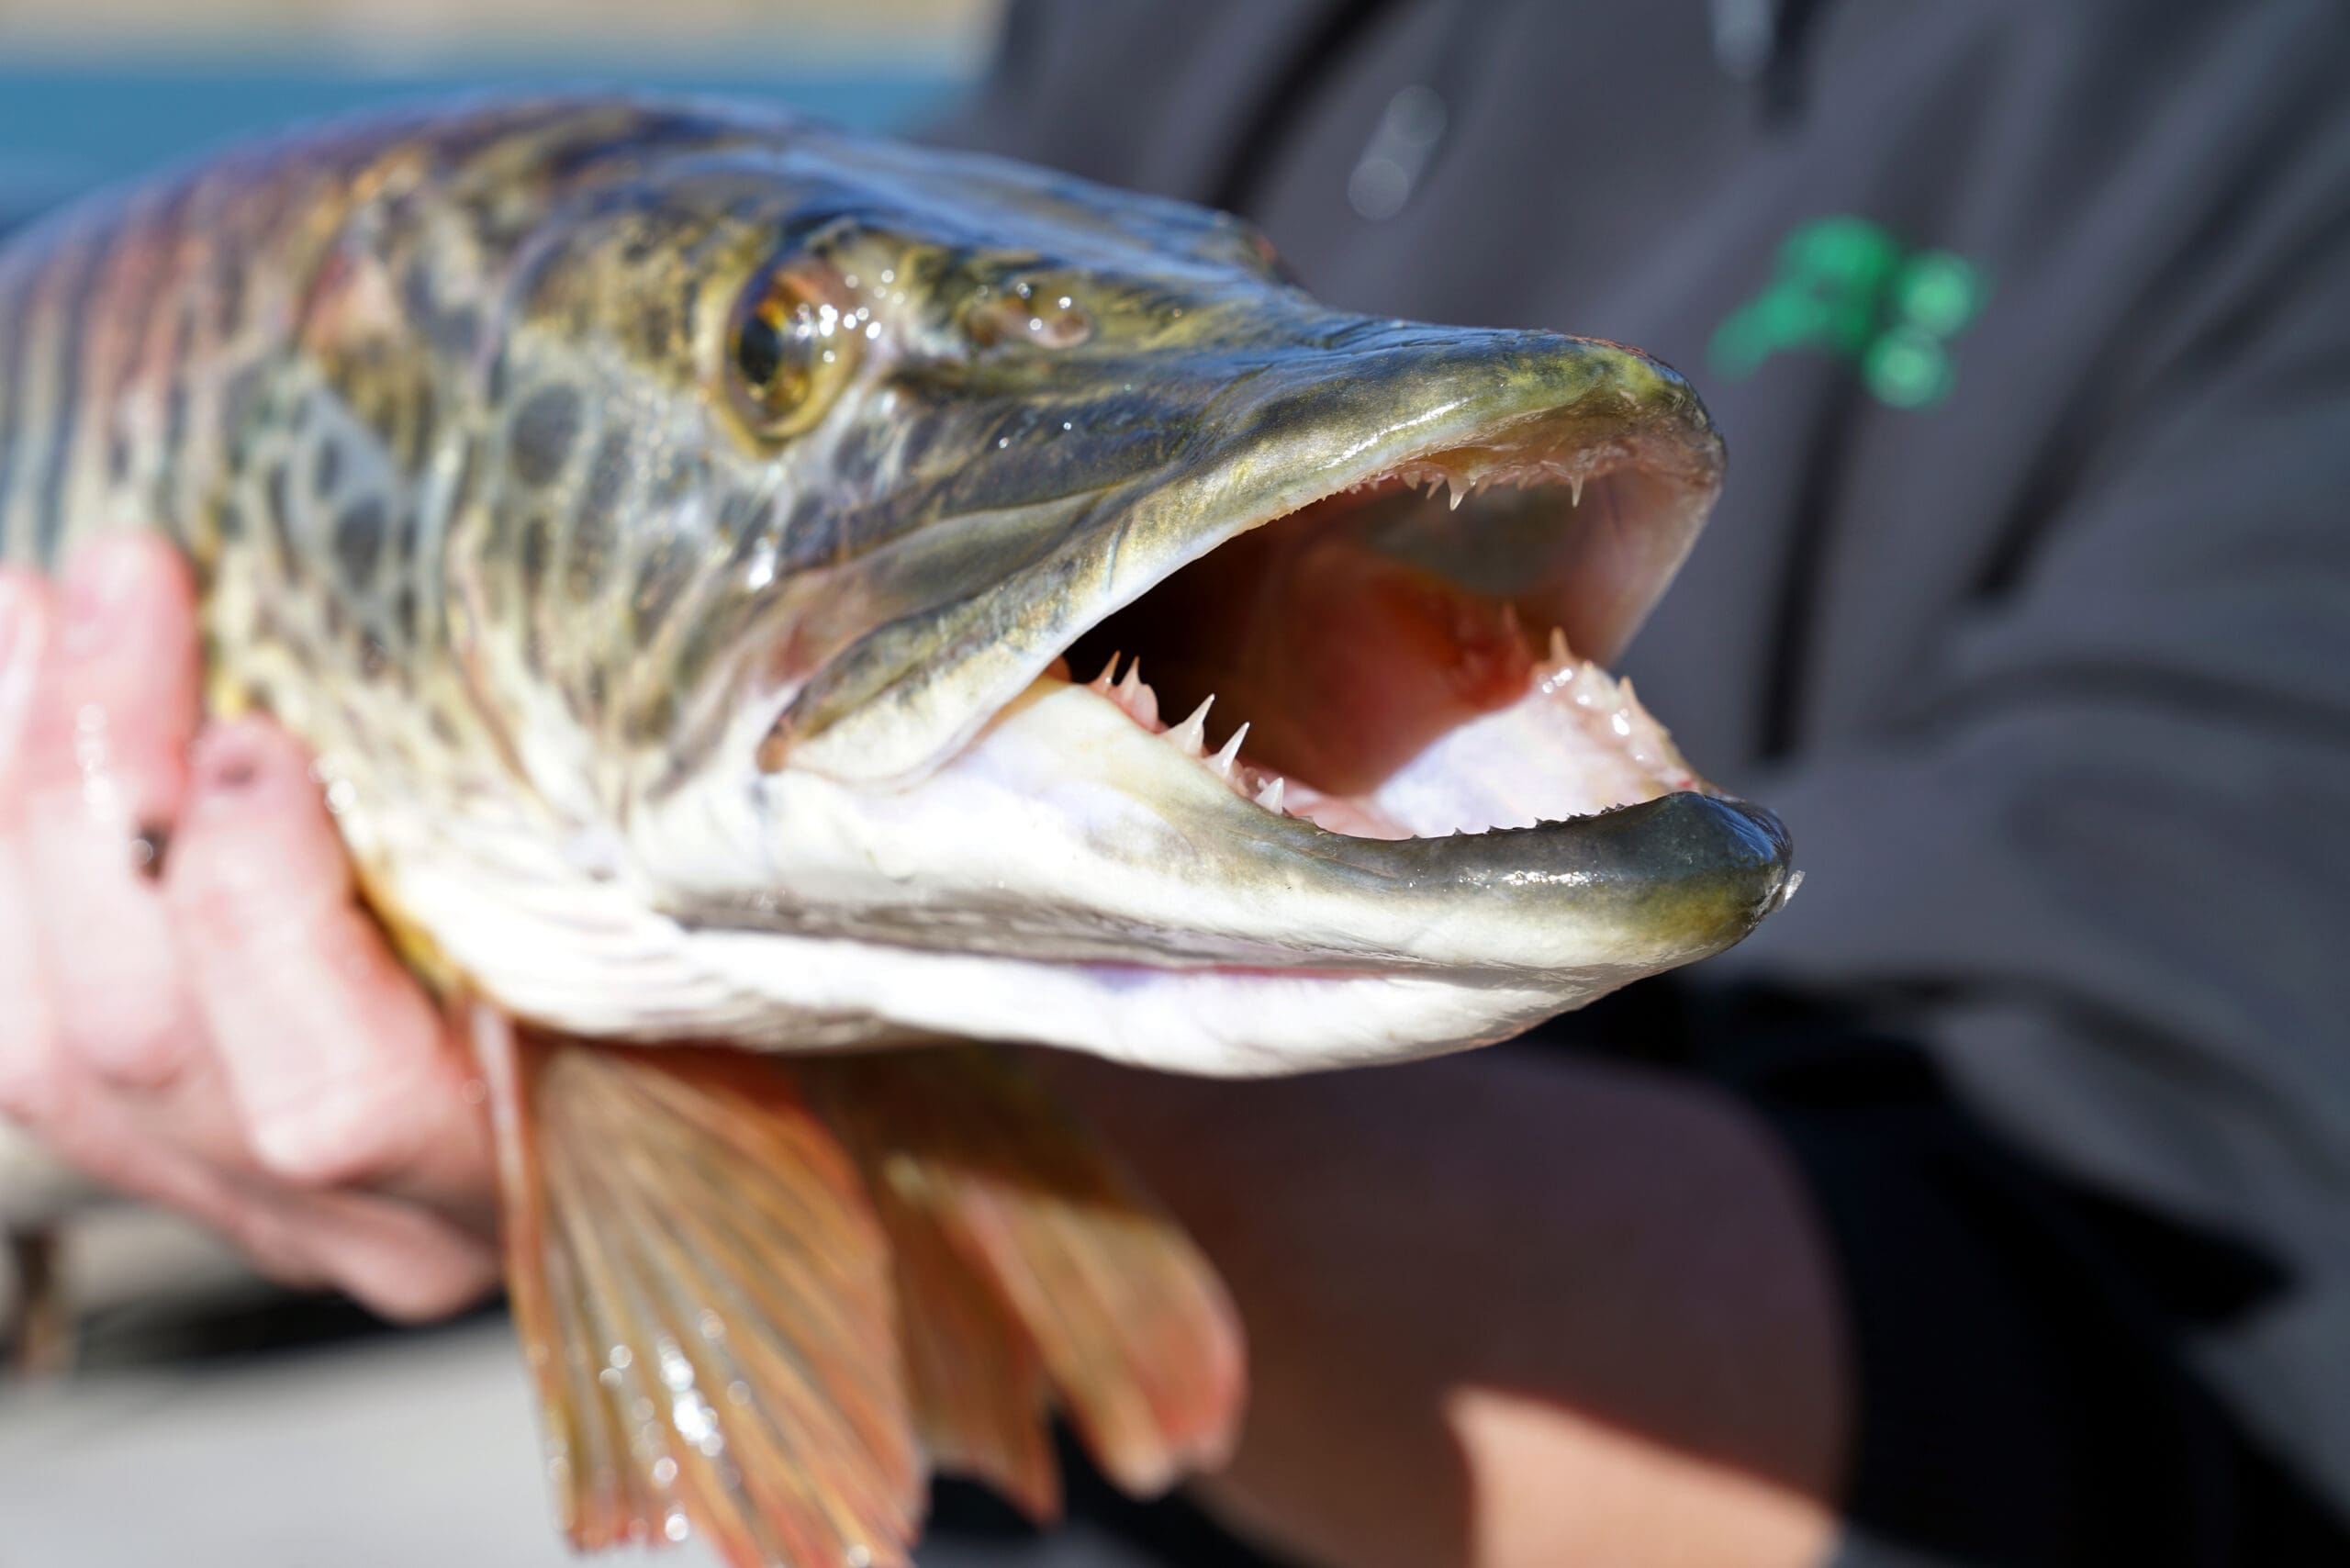 Angler alert: DWR achieves successful tiger muskie hatching and rearing with innovative approach - TownLift, Park City News